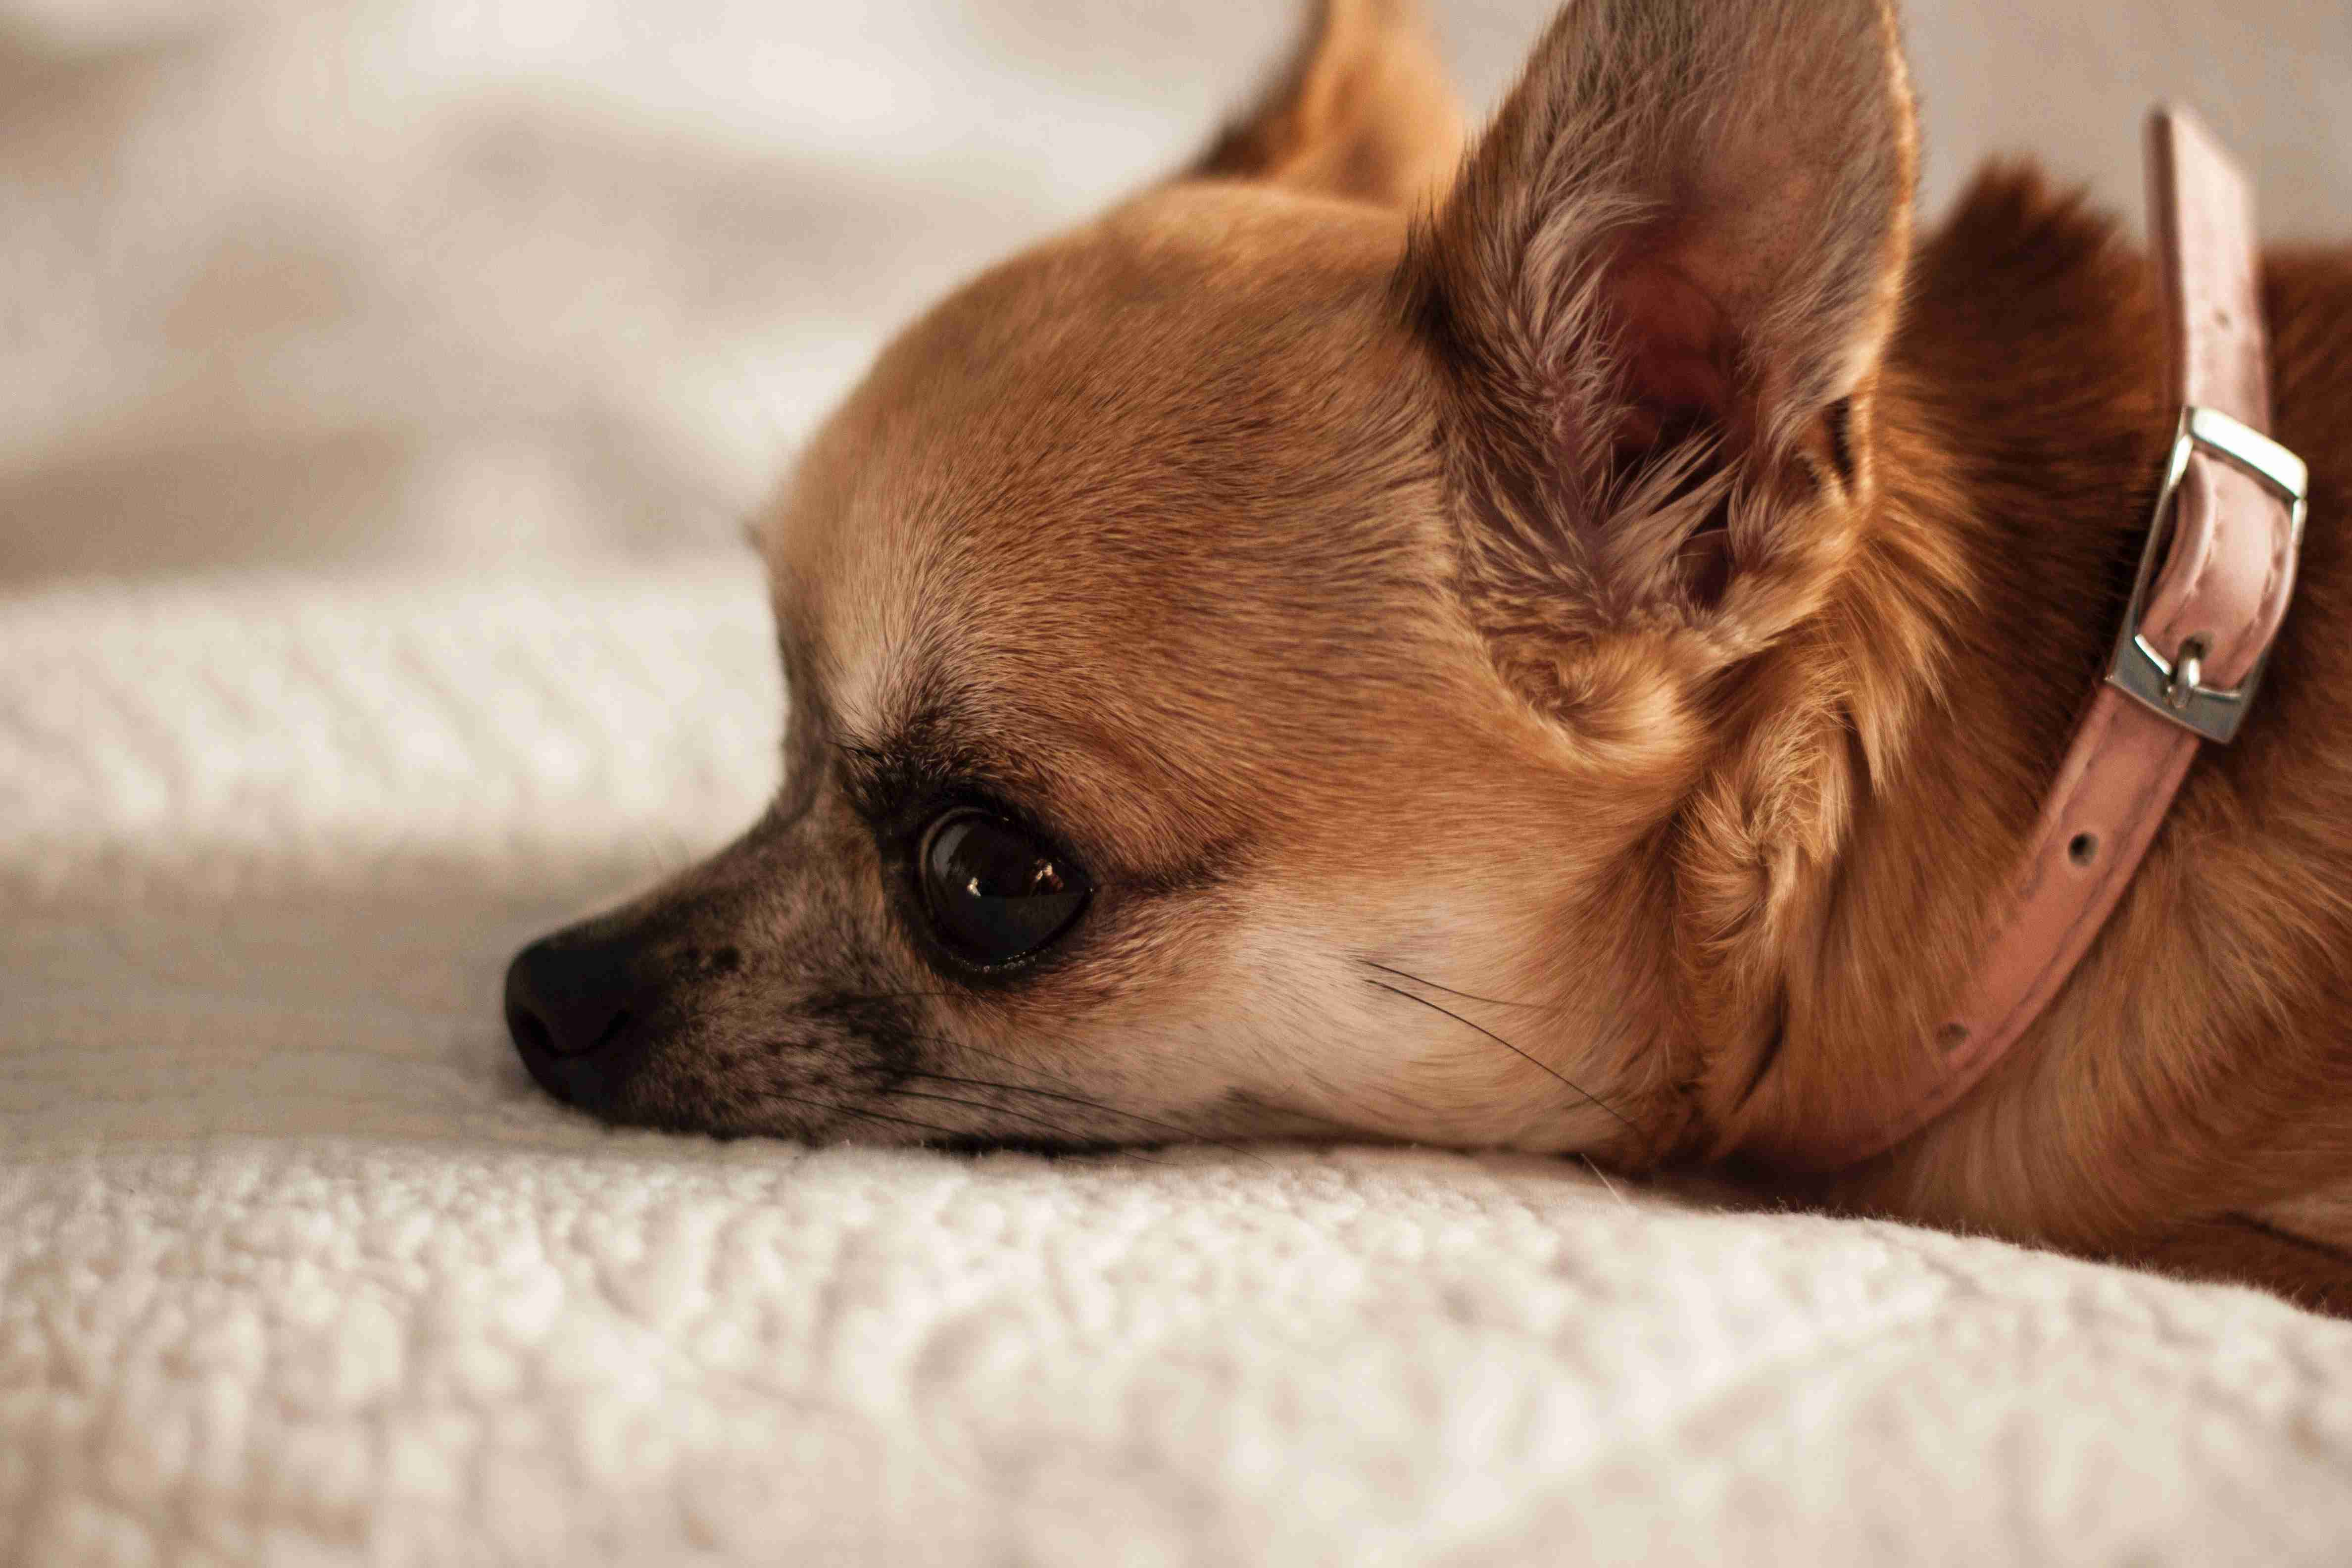 Are there any specific exercises or activities that can help drain a Chihuahua's excess energy and reduce anger?